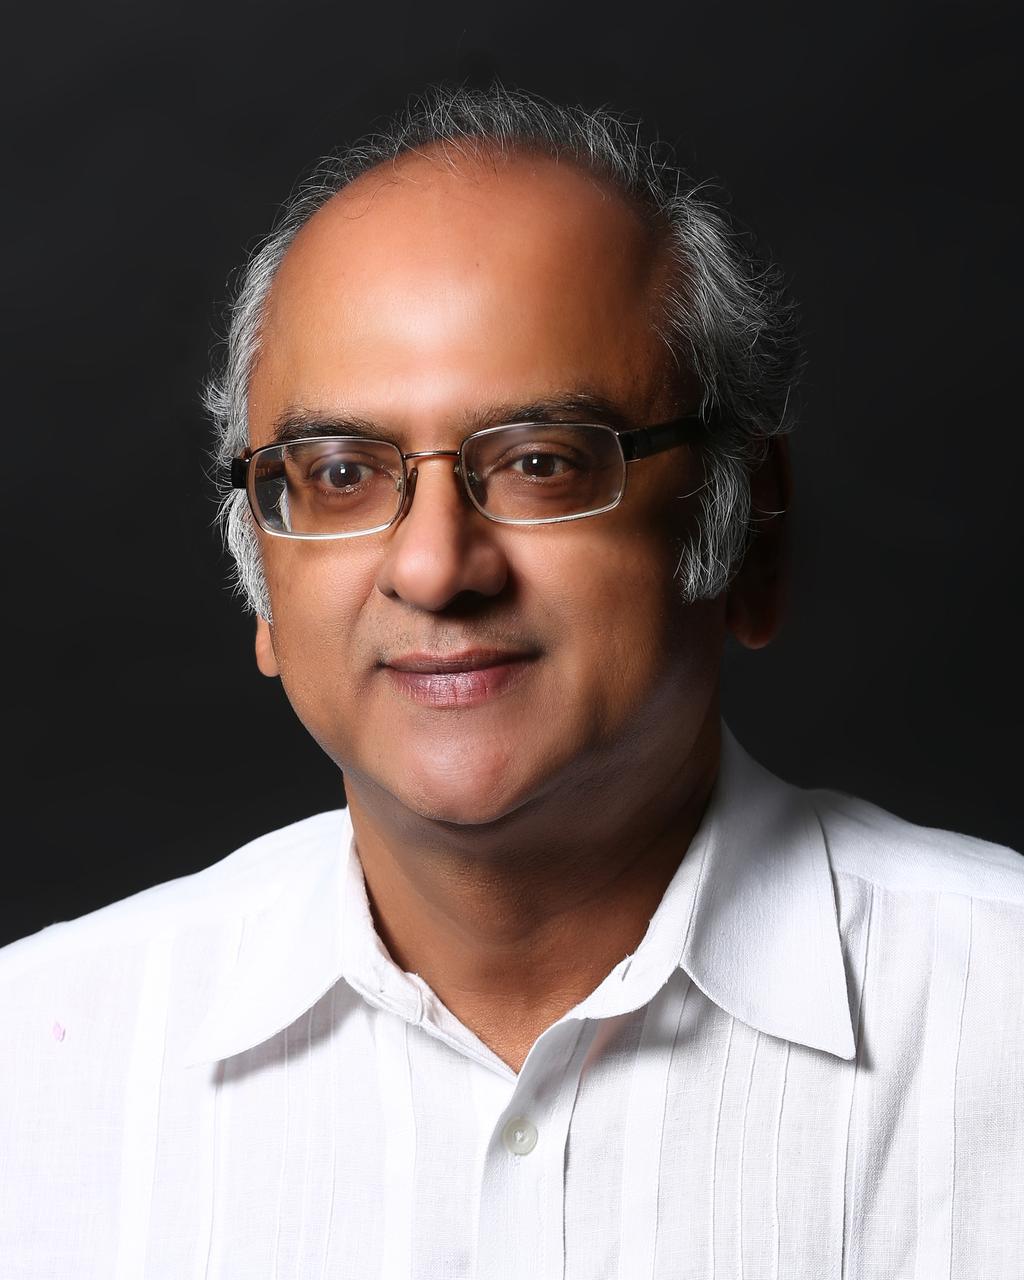 Dr. Mohan Guruswamy Chief Knowledge Officer, World Free Zones Organization (World FZO) Dr. Mohan G. has over two decades of experience in the areas of Strategic Planning and Organizational Development.